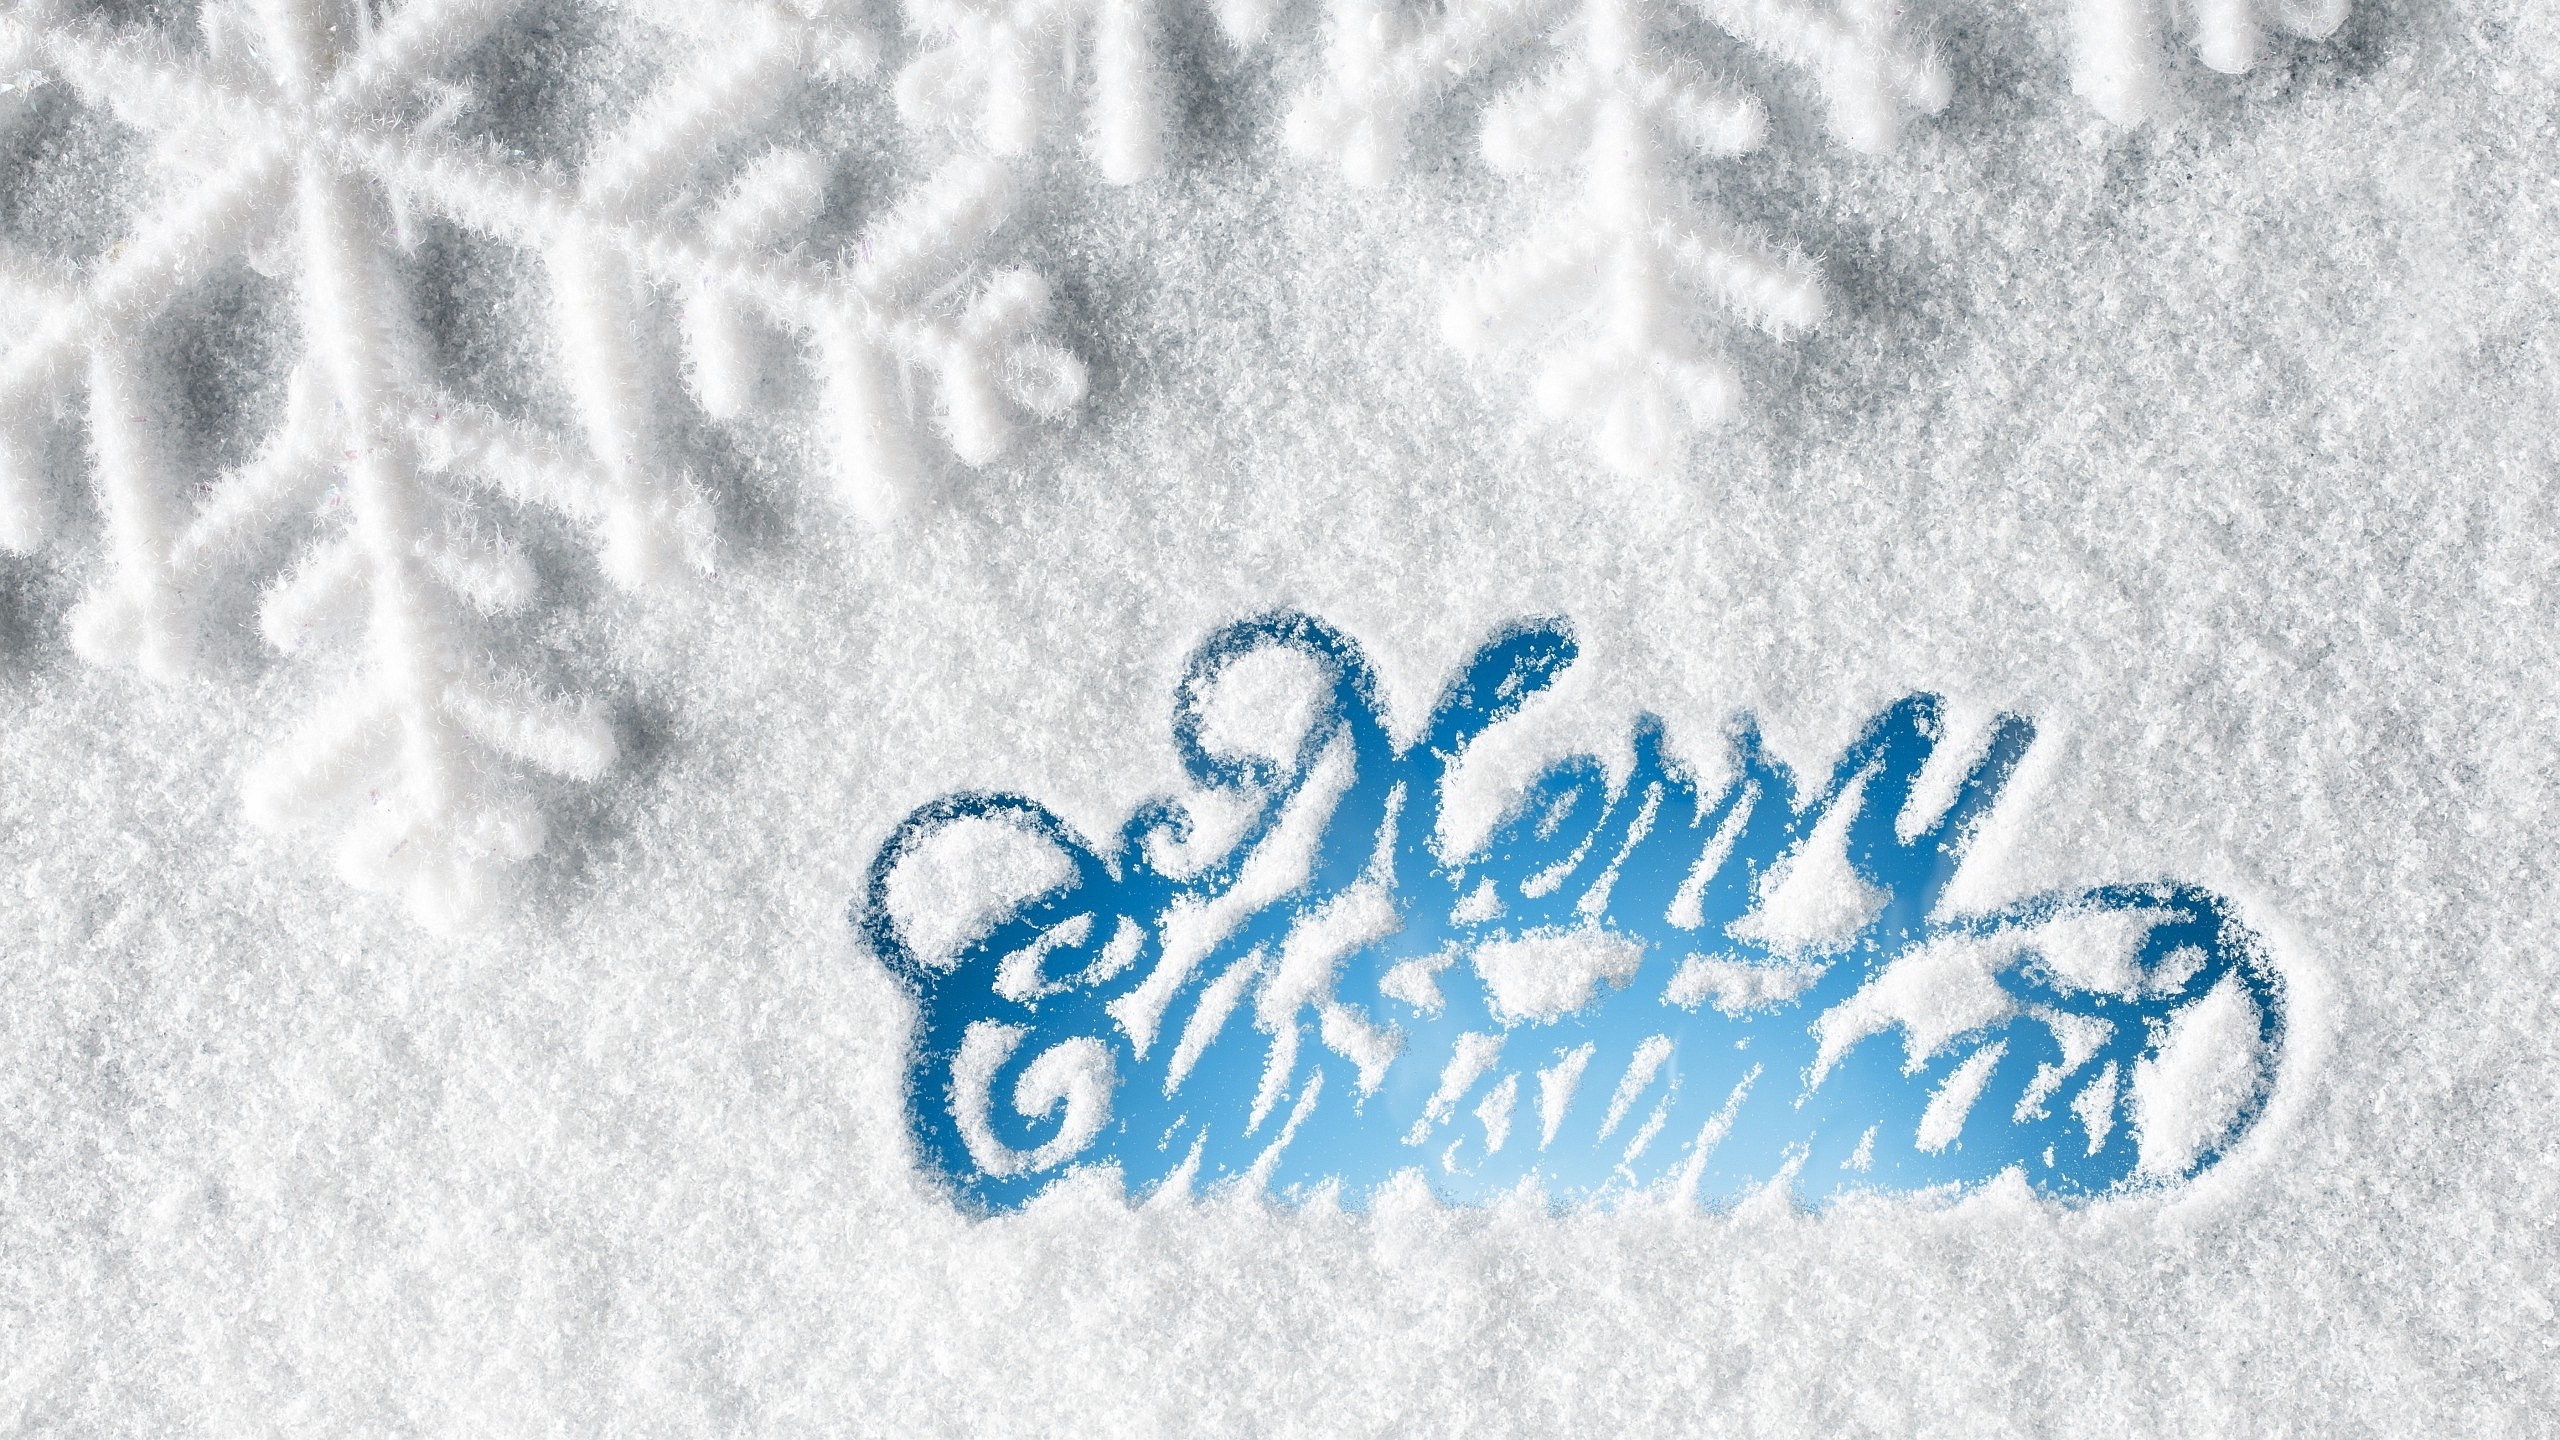 General 2560x1440 Christmas snow text holiday